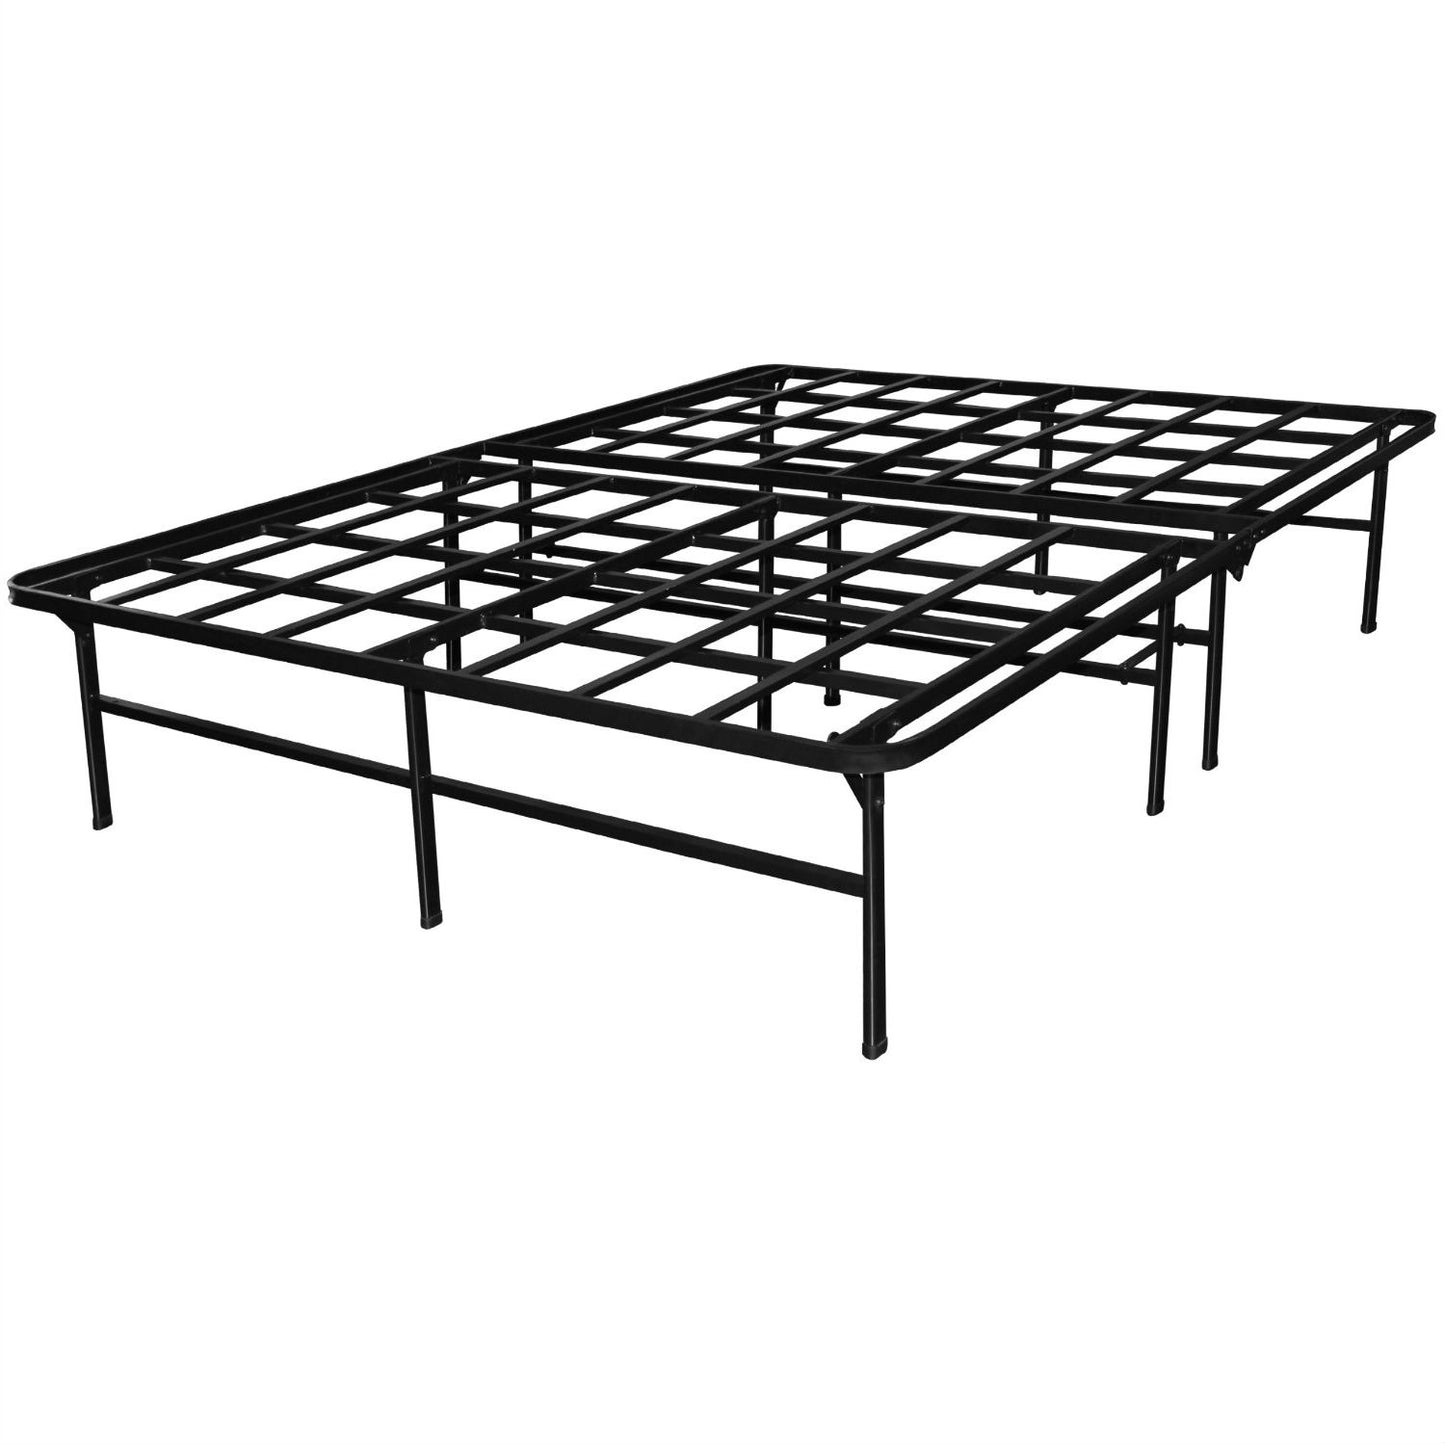 Queen size Heavy Duty Metal Platform Bed Frame - Supports up to 4,400 lbs